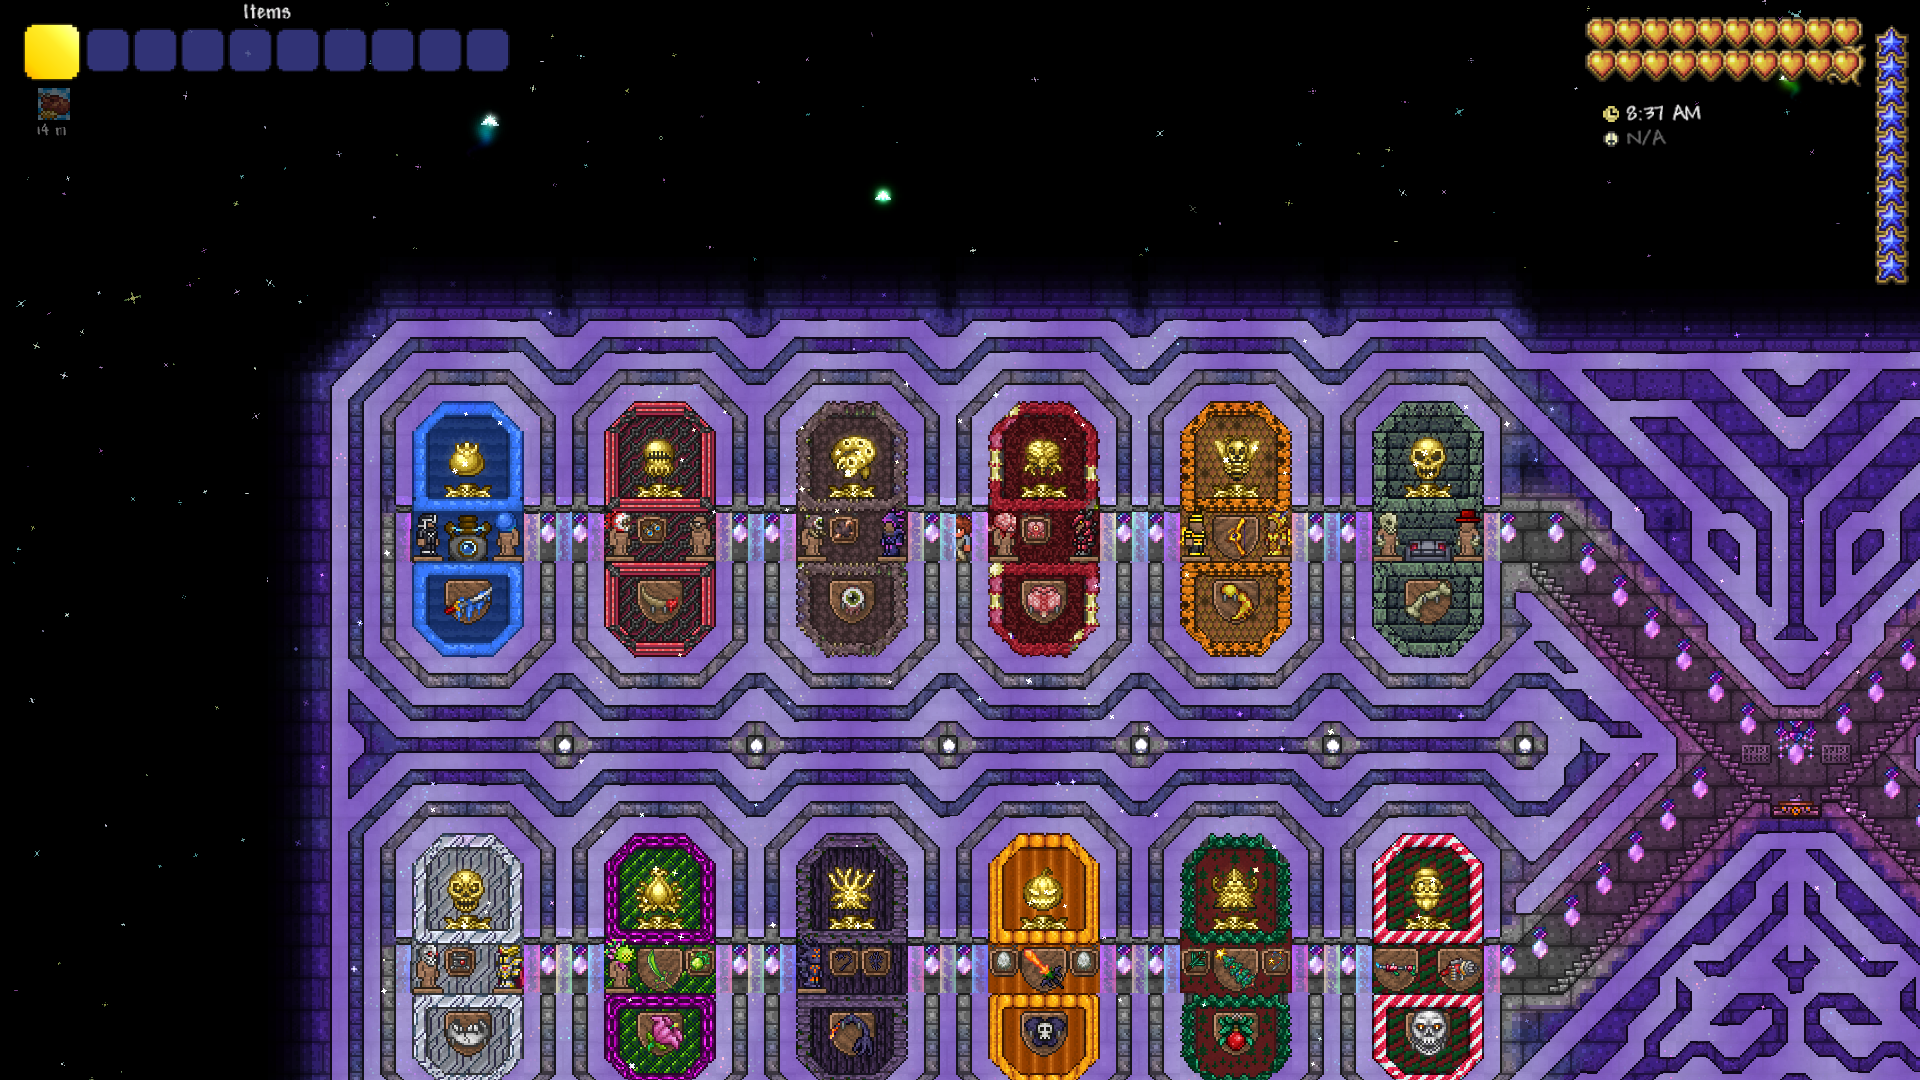 Terraria: How to Make a Chest